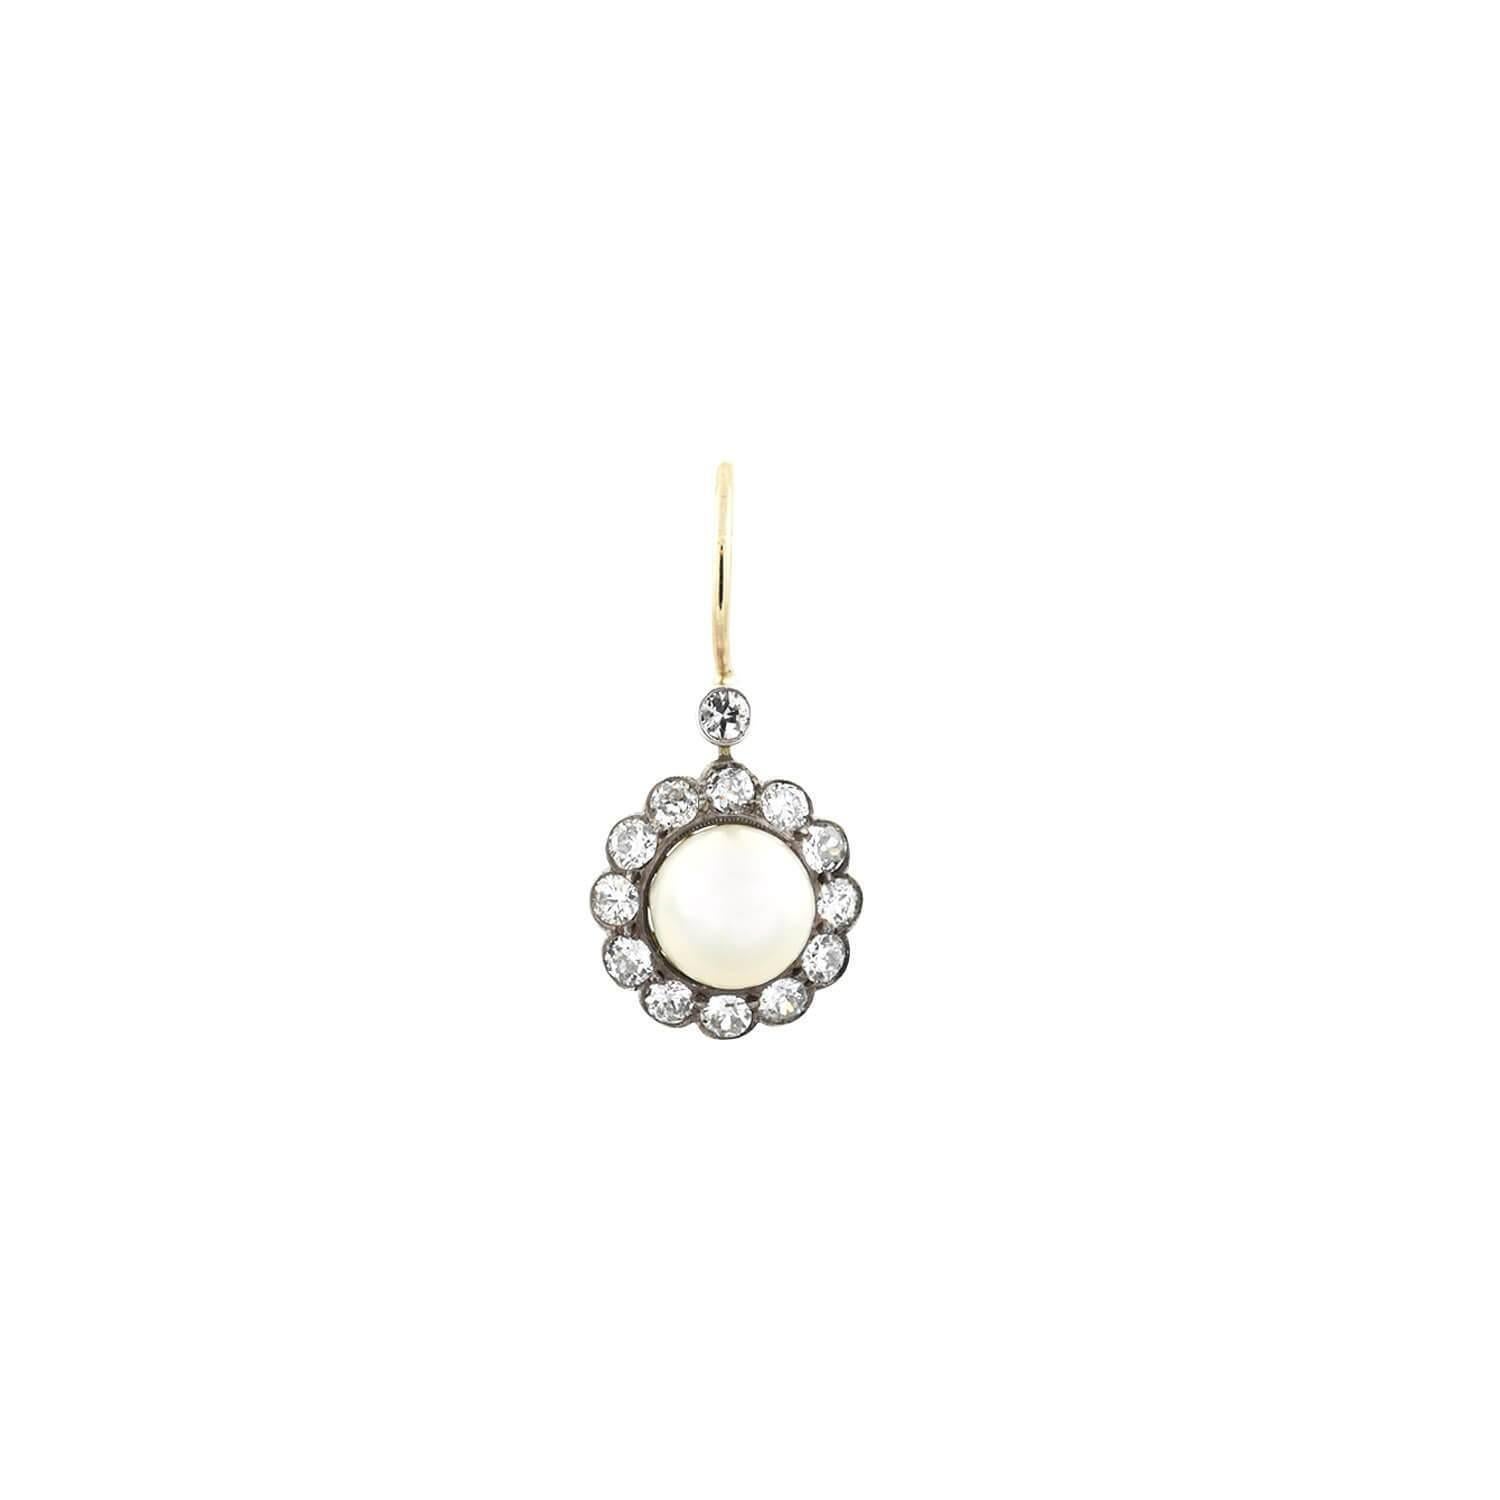 A gorgeous pair of pearl and diamond earrings from the Edwardian (ca1910s) era! Crafted in 14kt yellow gold and topped in platinum, each earring features a fantastic natural pearl center surrounded by a diamond border. The round pearls have a